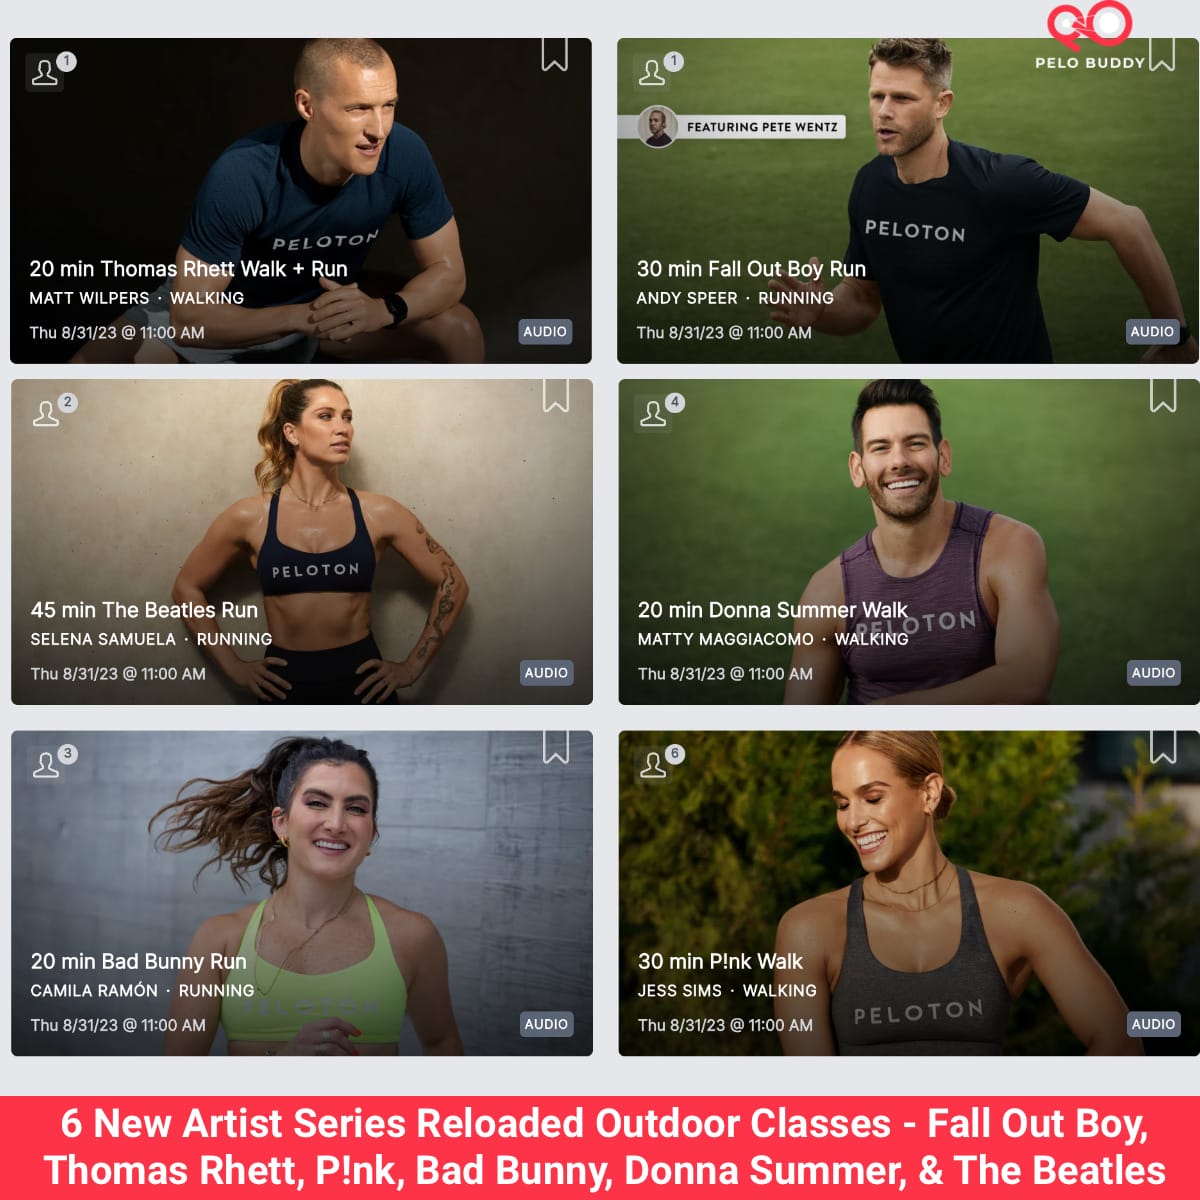 Peloton Releases 6 New Artist Series Reloaded Outdoor Classes - Fall Out  Boy, Thomas Rhett, P!nk, Bad Bunny, Donna Summer, & The Beatles - Peloton  Buddy